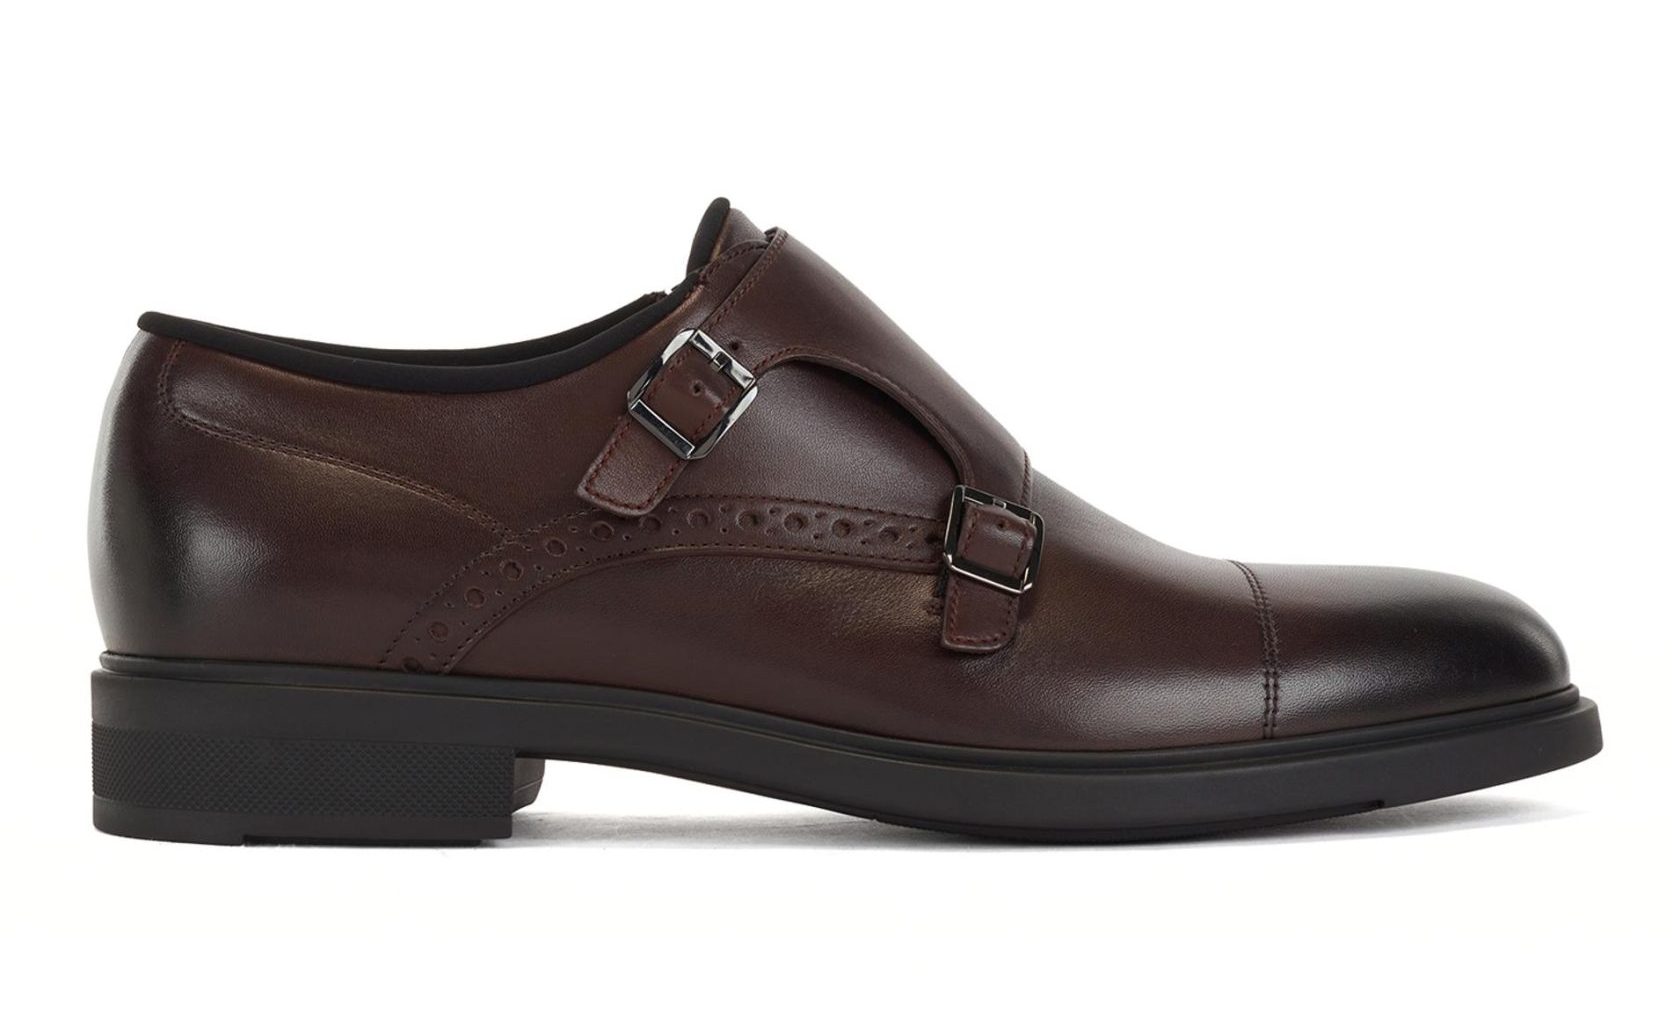 photo of a pair of monk strap shoes for men